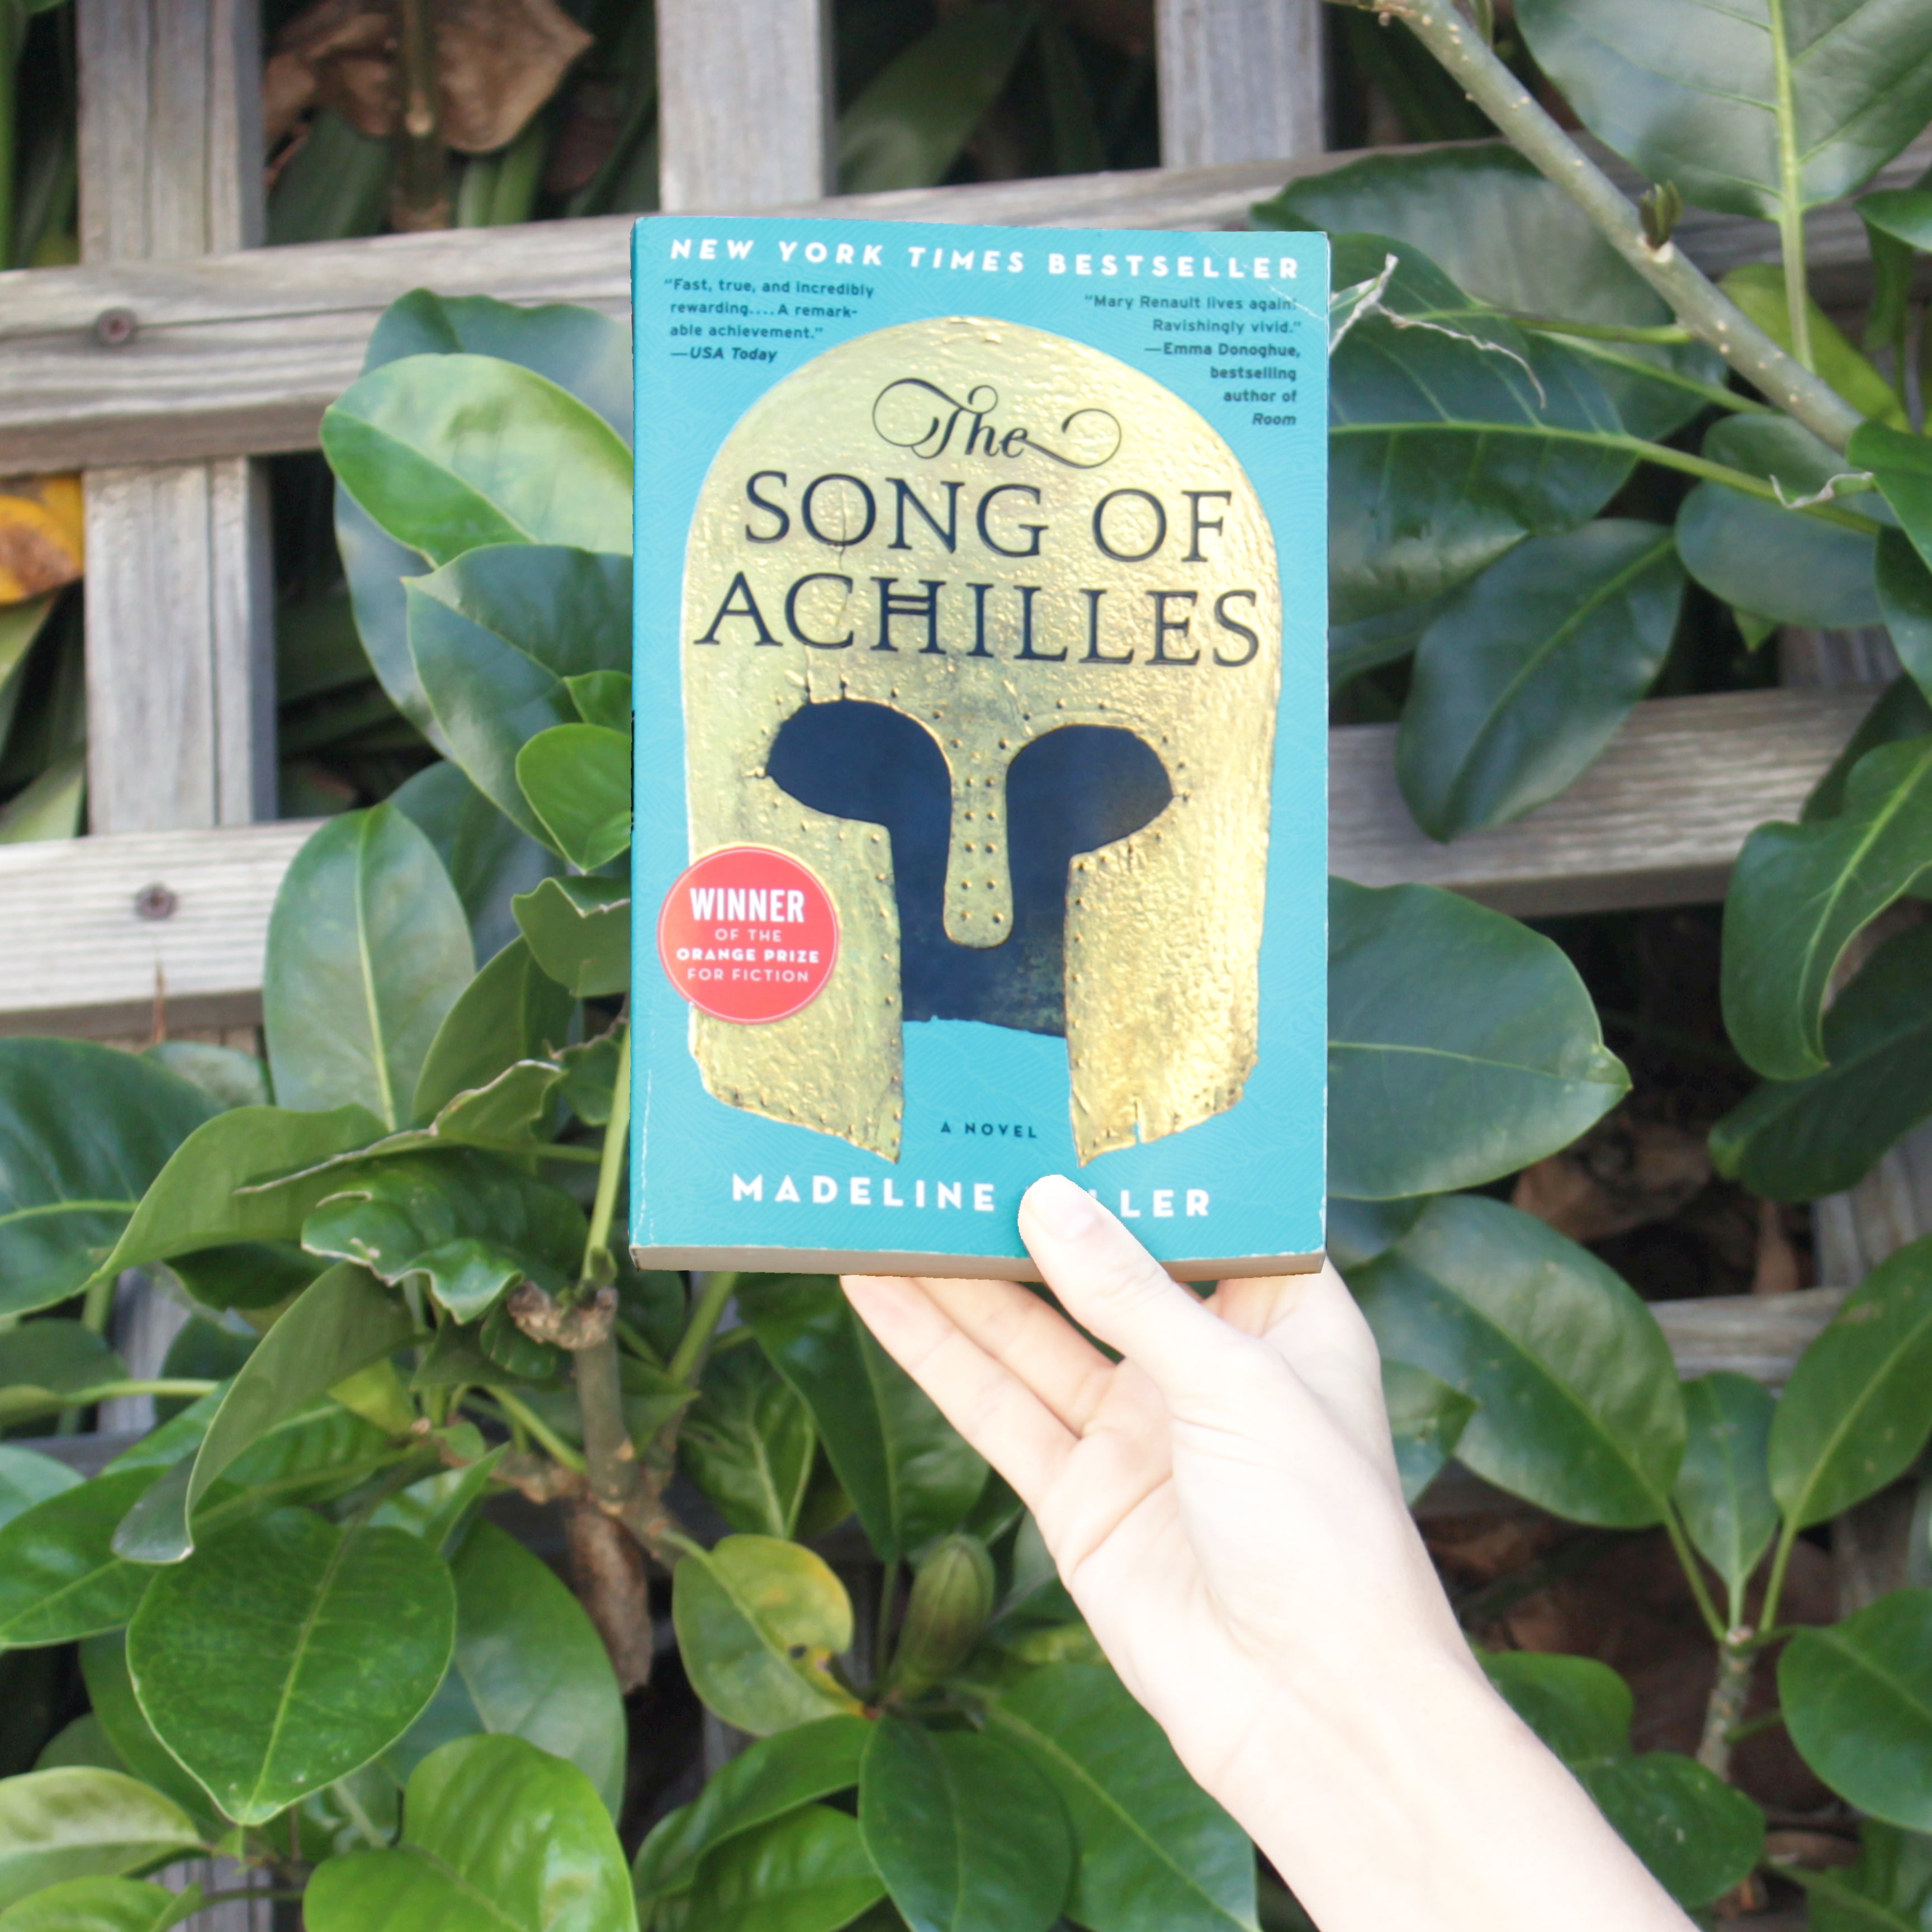 Favorite Sewing Projects & Reads: "The Song of Achilles"